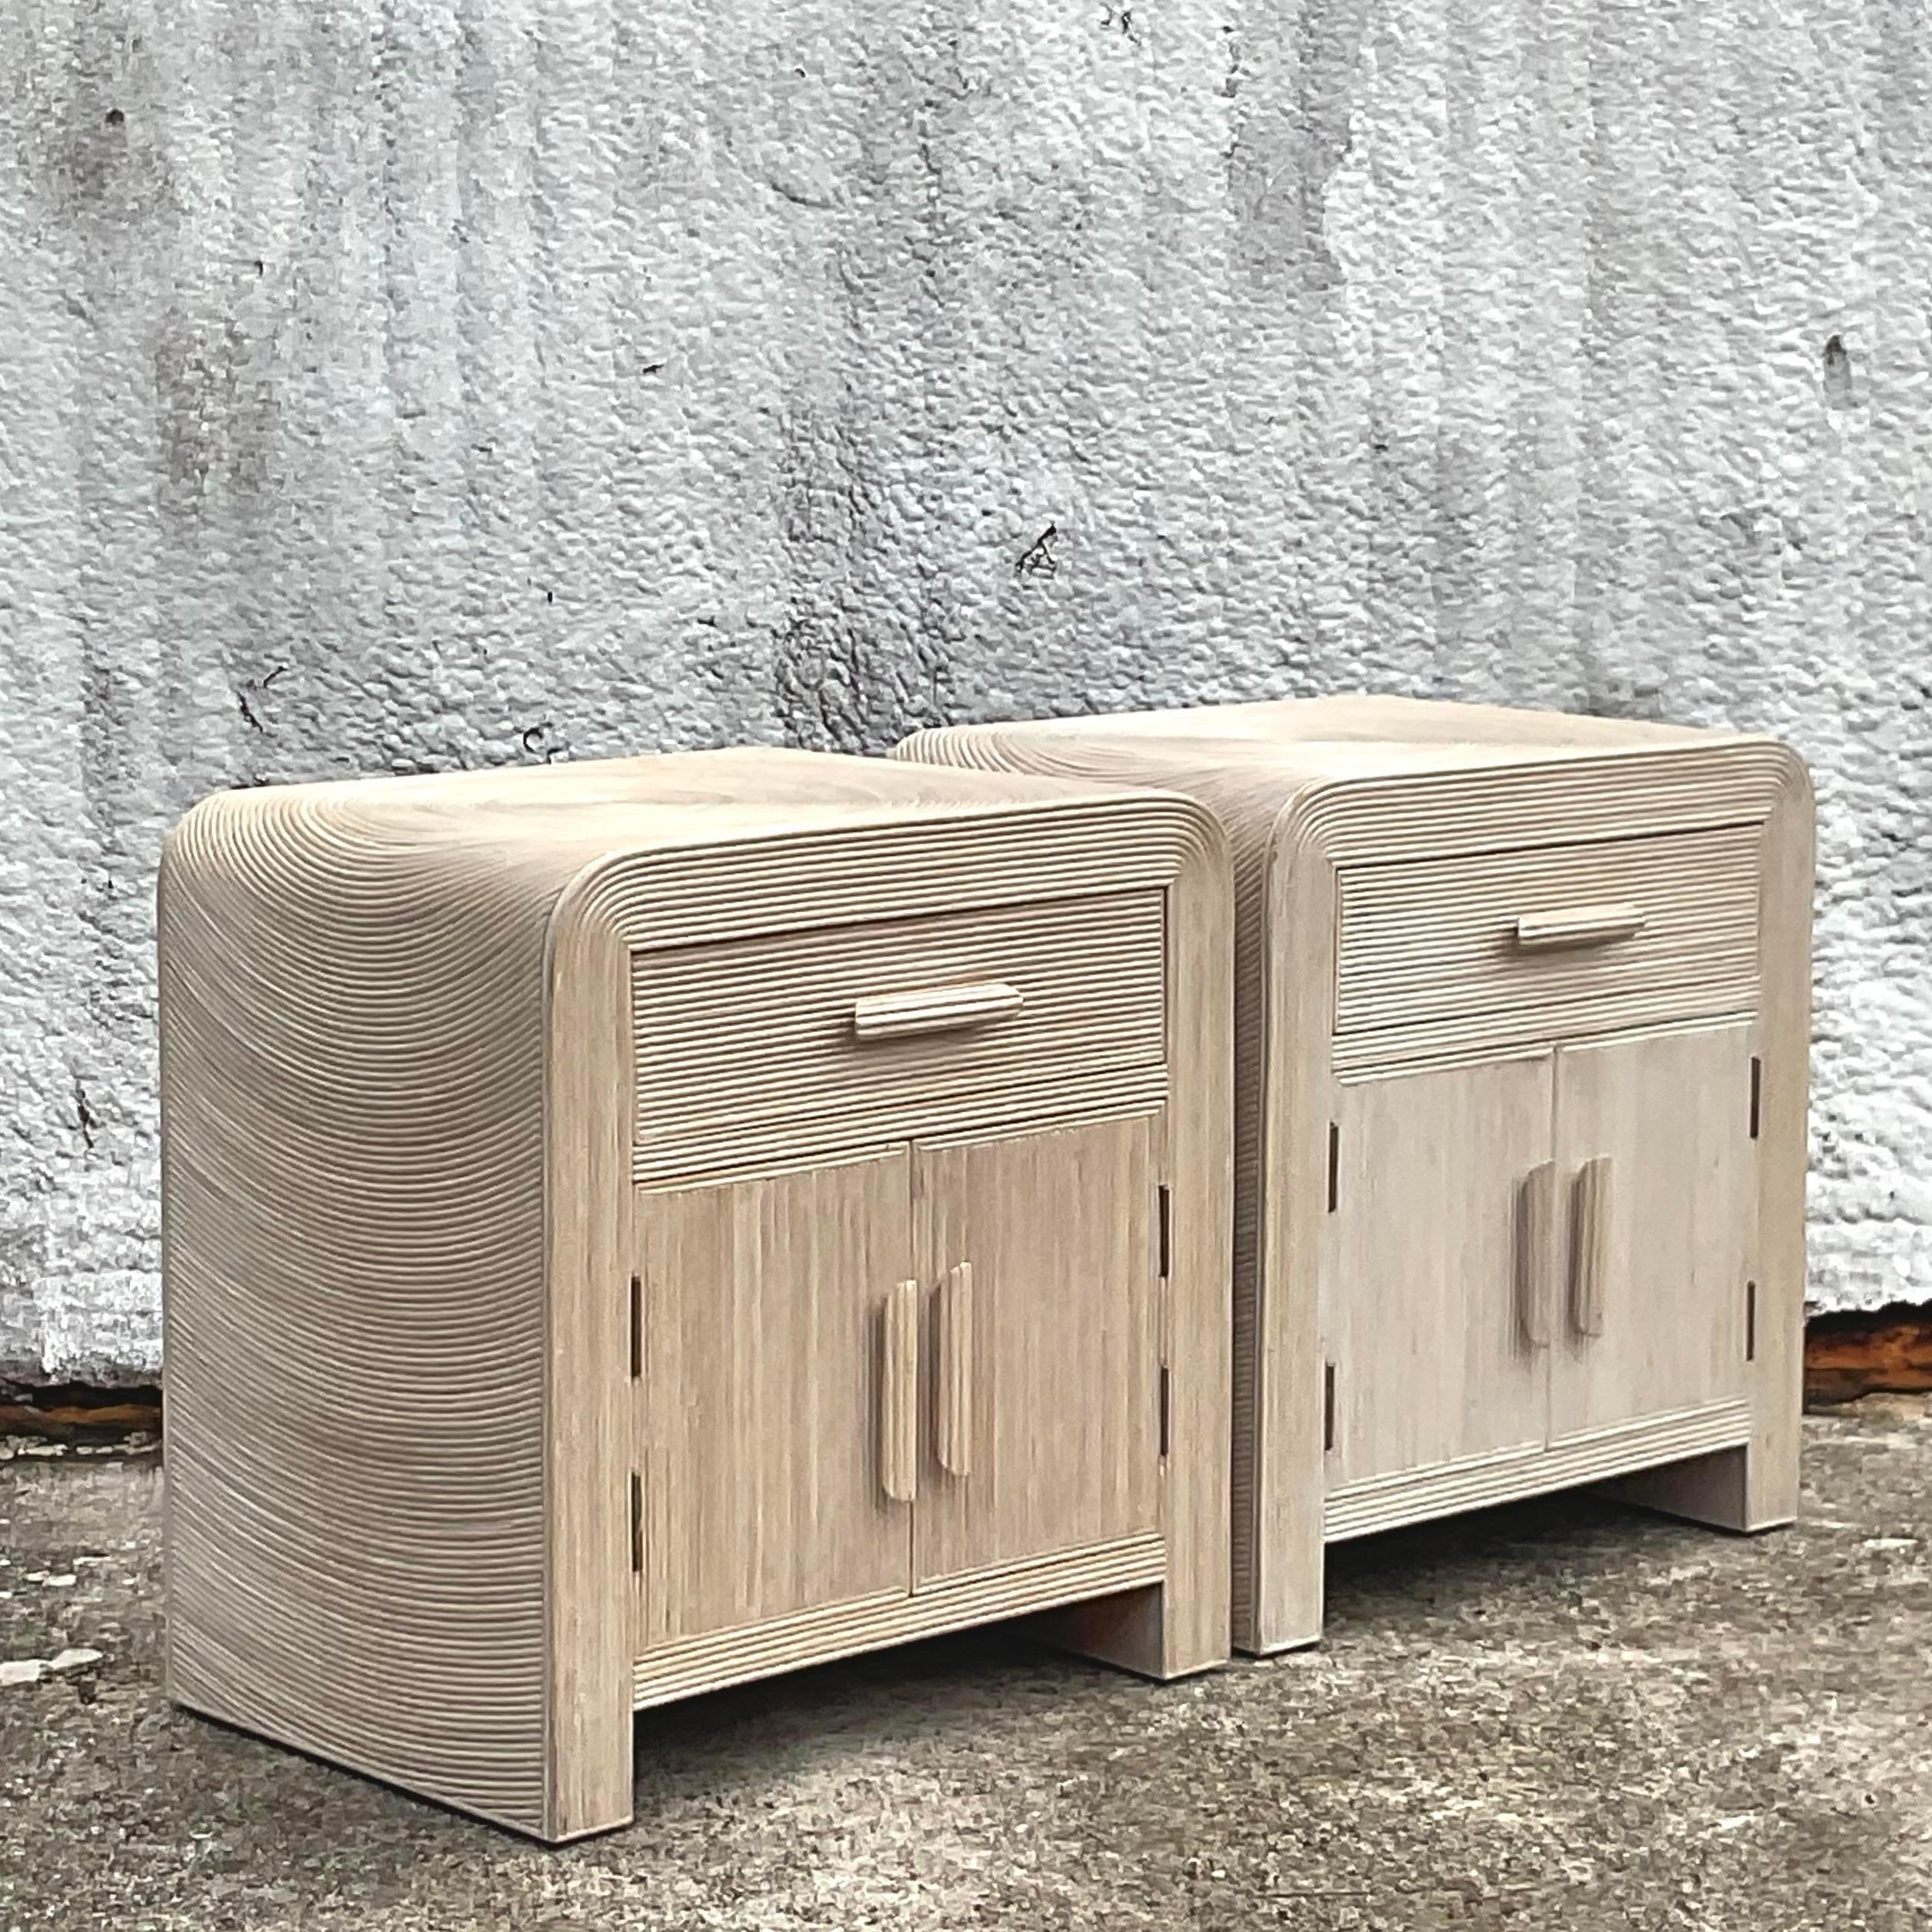 A fabulous pair of vintage Coastal nightstand. A chic pencil reed cabinet with a modern cerused finish. A waterfall edge with the coveted starburst design on top. Acquired from a Palm Beach estate.